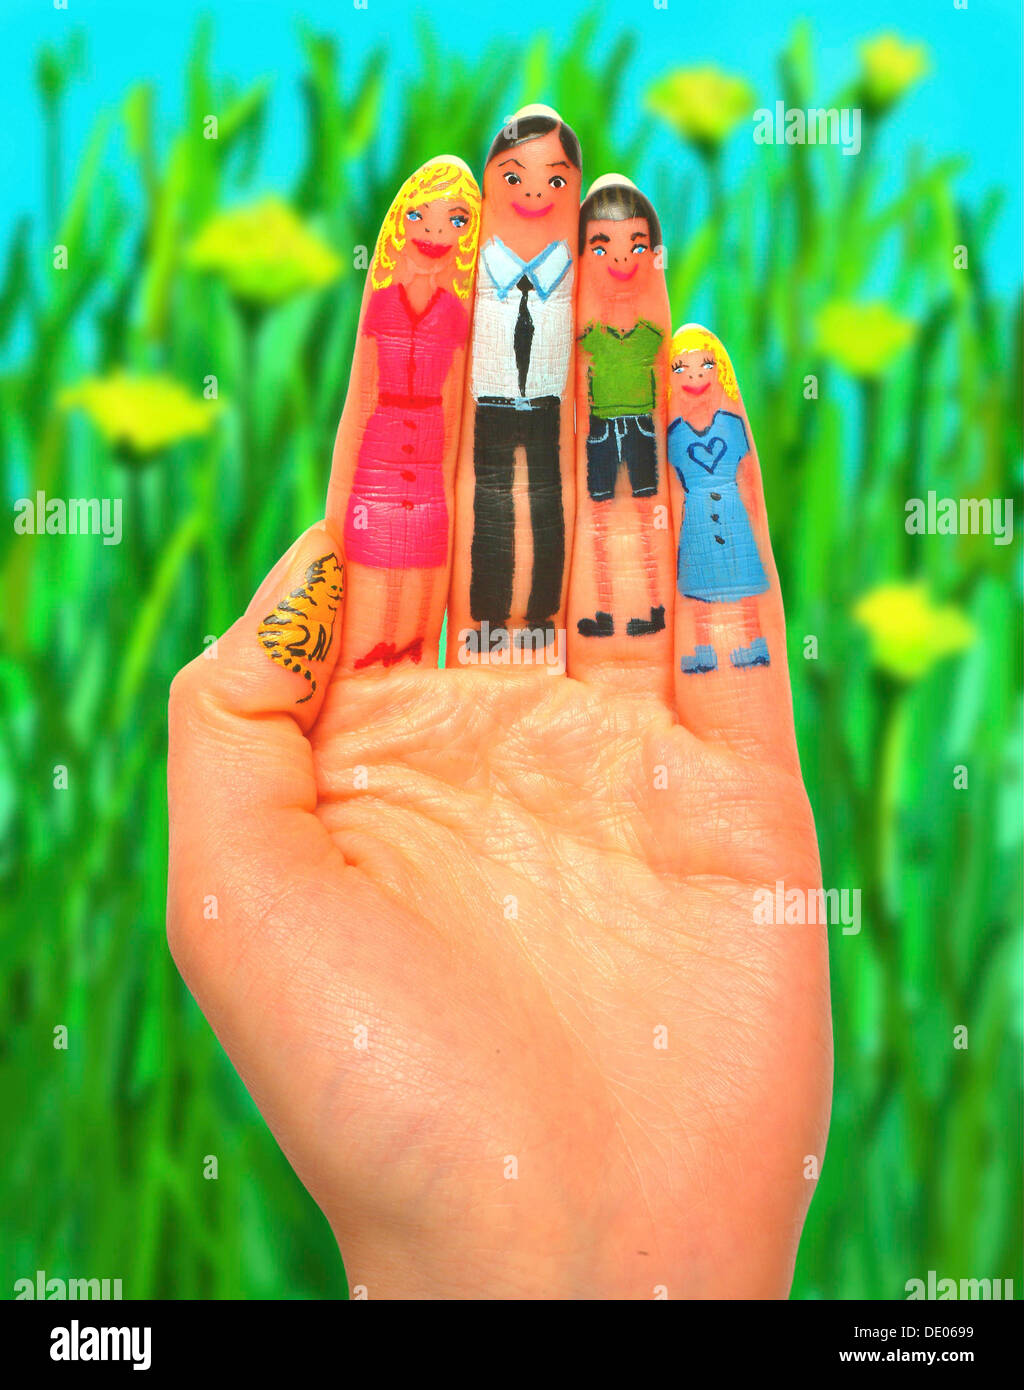 Family painted on the fingers of a hand, flower meadow, composing Stock Photo